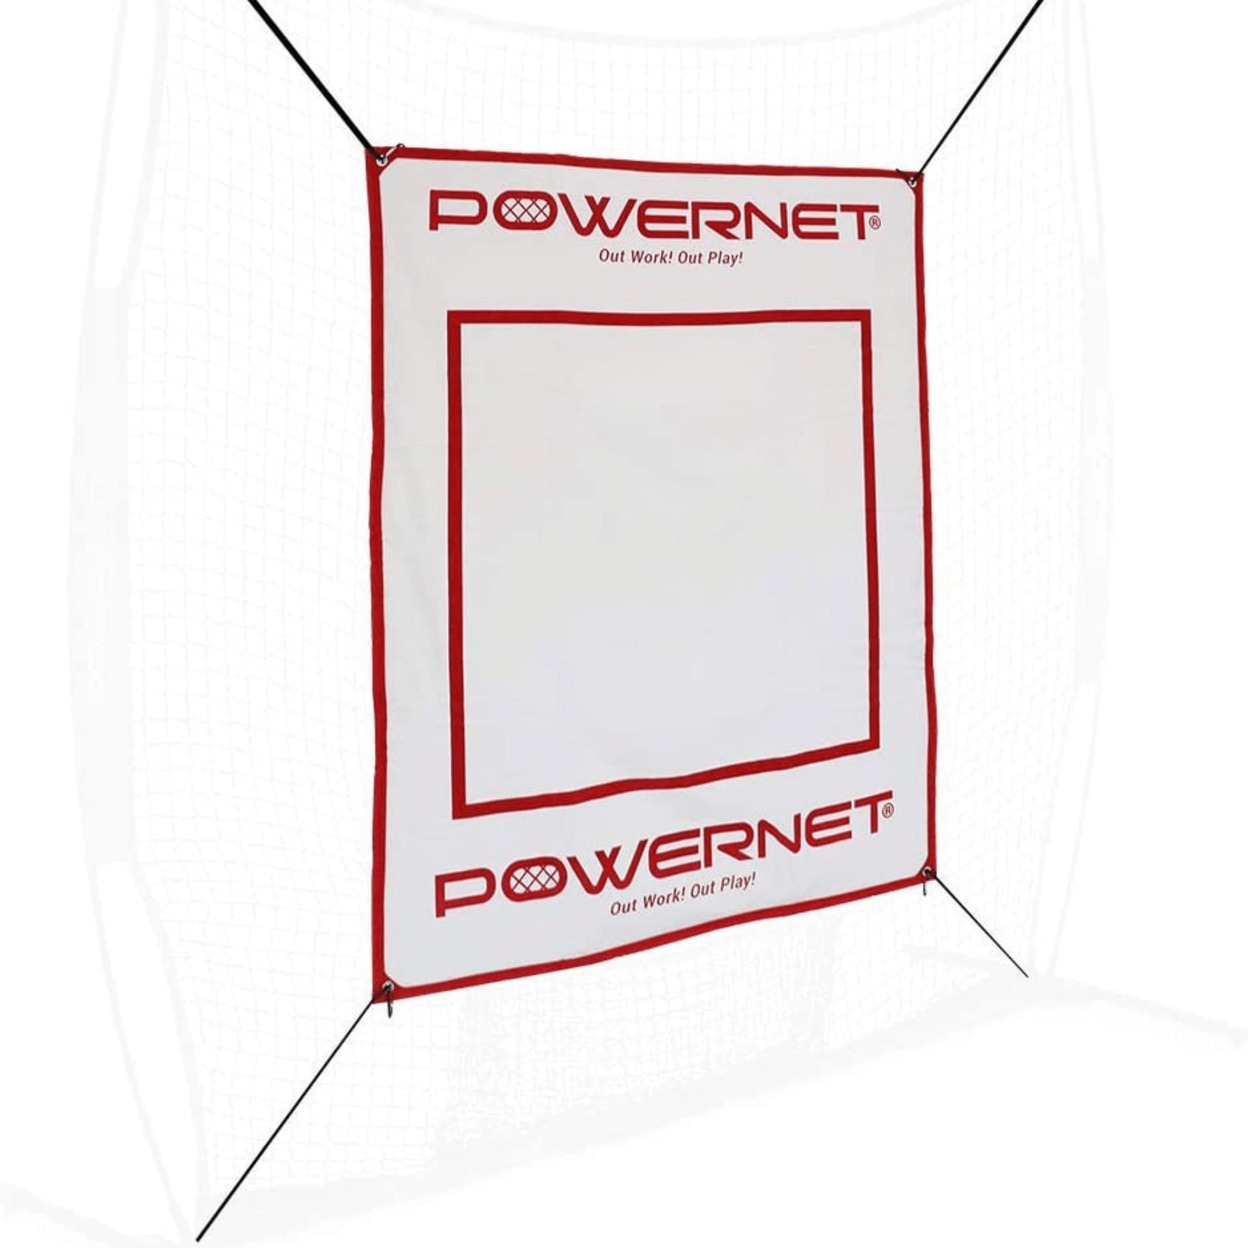 PowerNet Power Pad Canvas Batting Pitching Backstop 46 X 59 Protection Area With Red Strike Zone